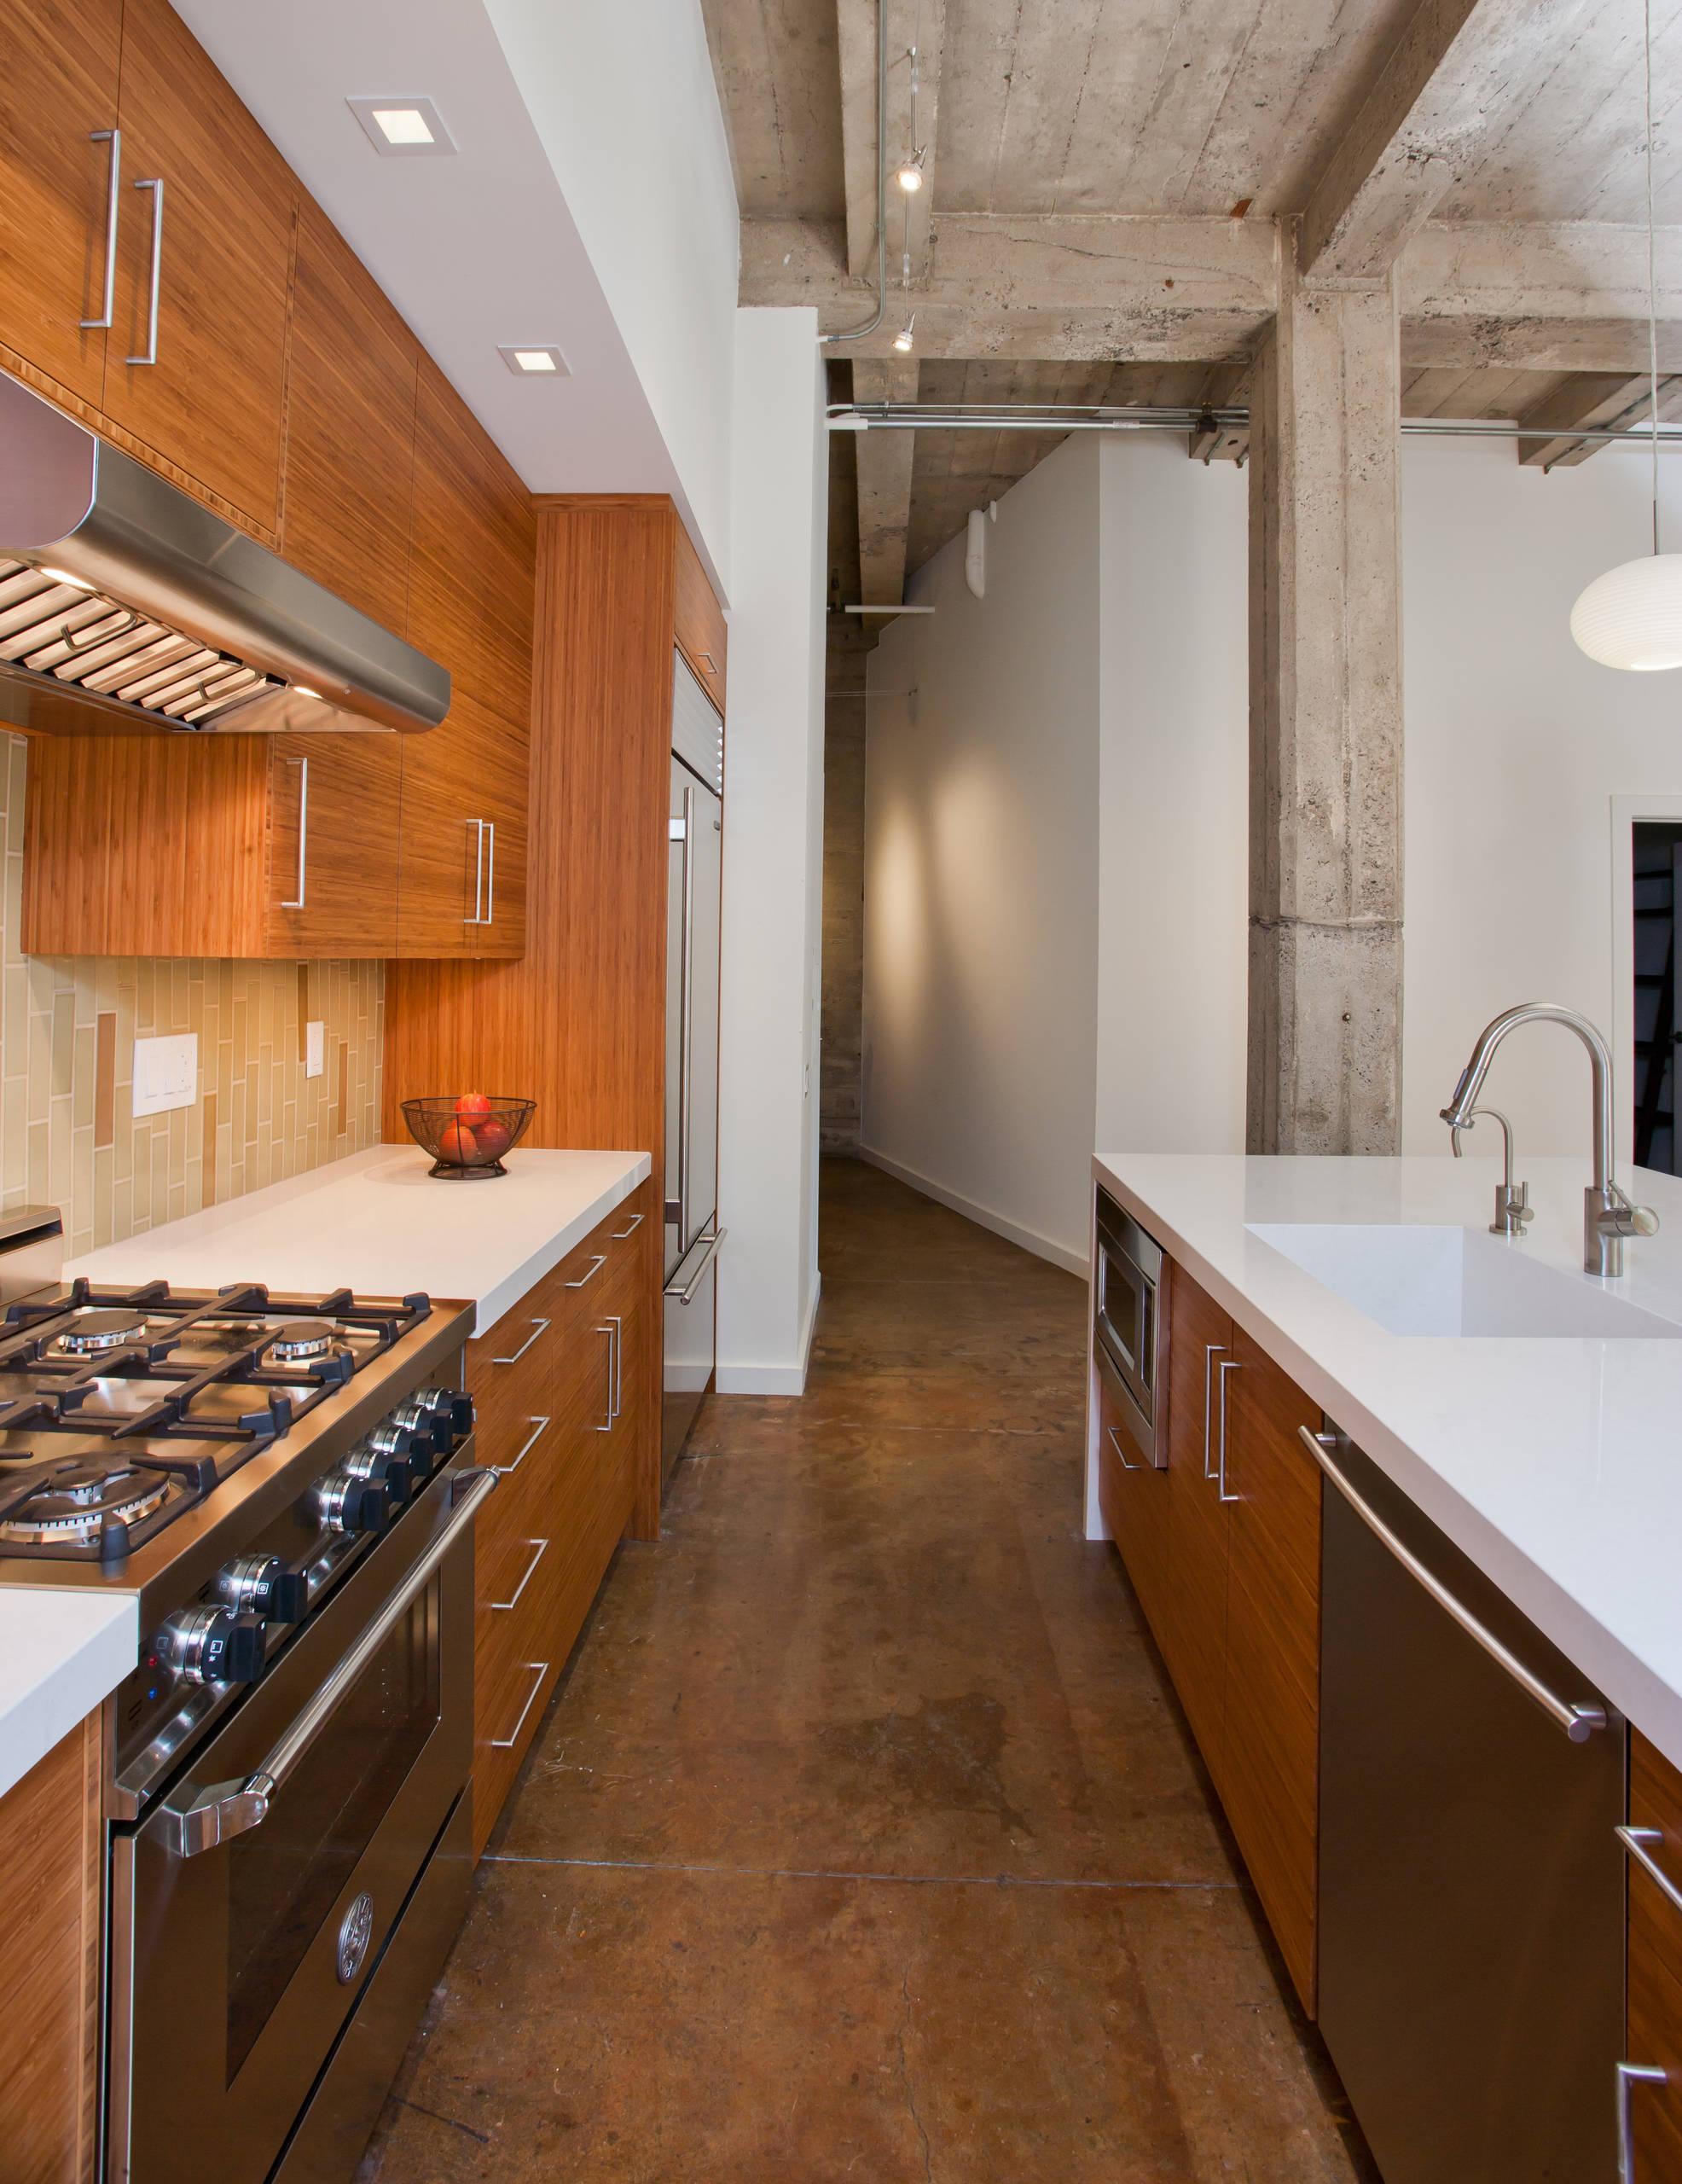 Modern Bamboo Kitchen in Eclectic Oakland Loft (aisle)